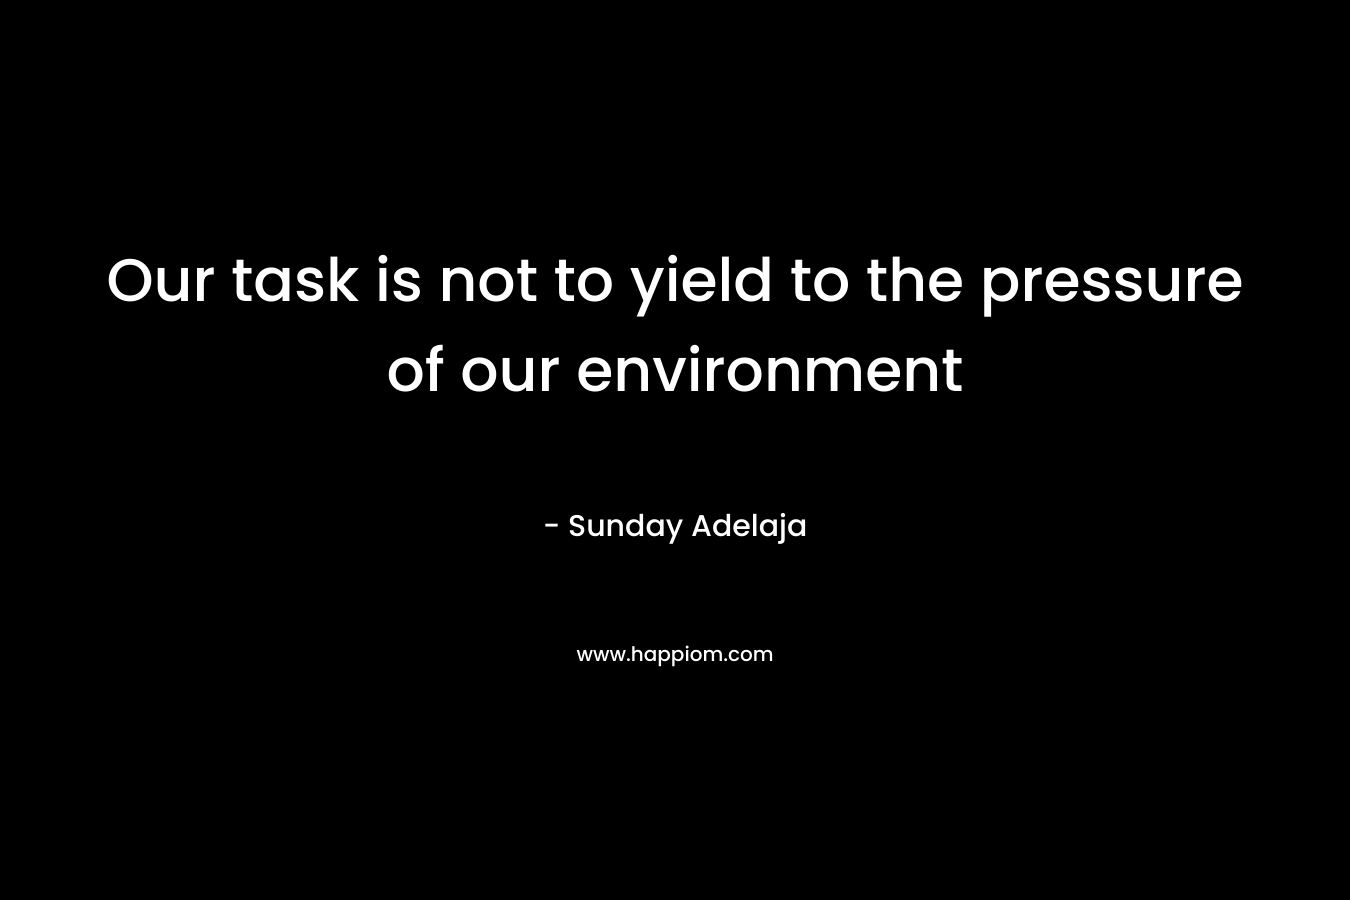 Our task is not to yield to the pressure of our environment